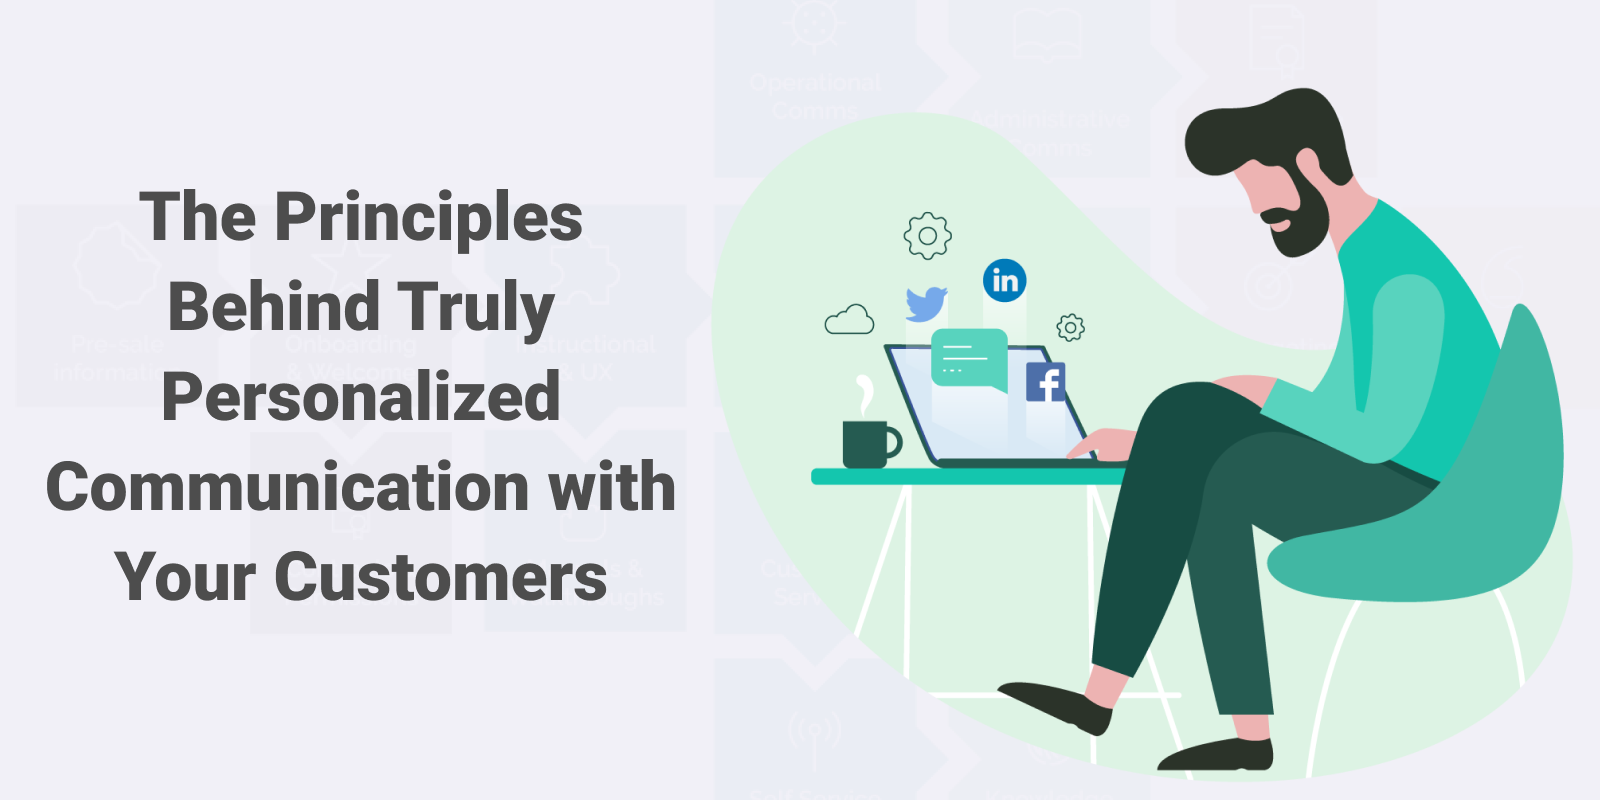 The Principles Behind Truly Personalized Communication with Your Customers